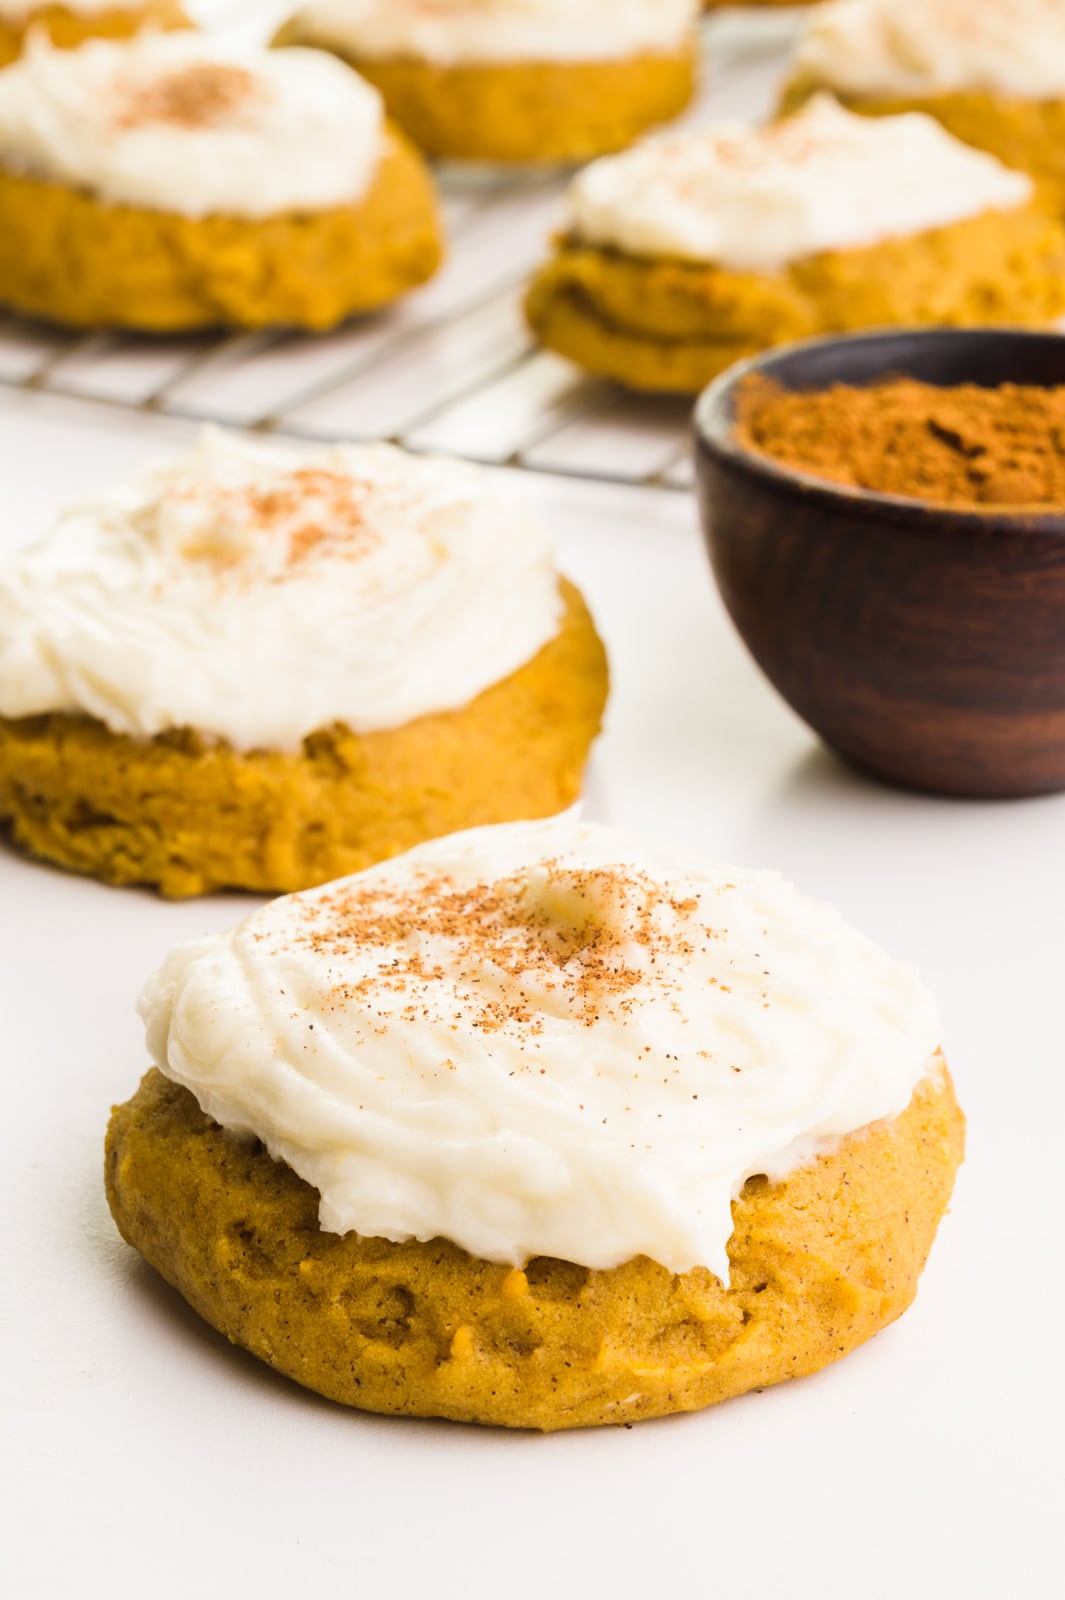 Frosted vegan pumpkin cookies sit on a white counter next to a bowl of spices. In the background is a wire rack with more cookies.